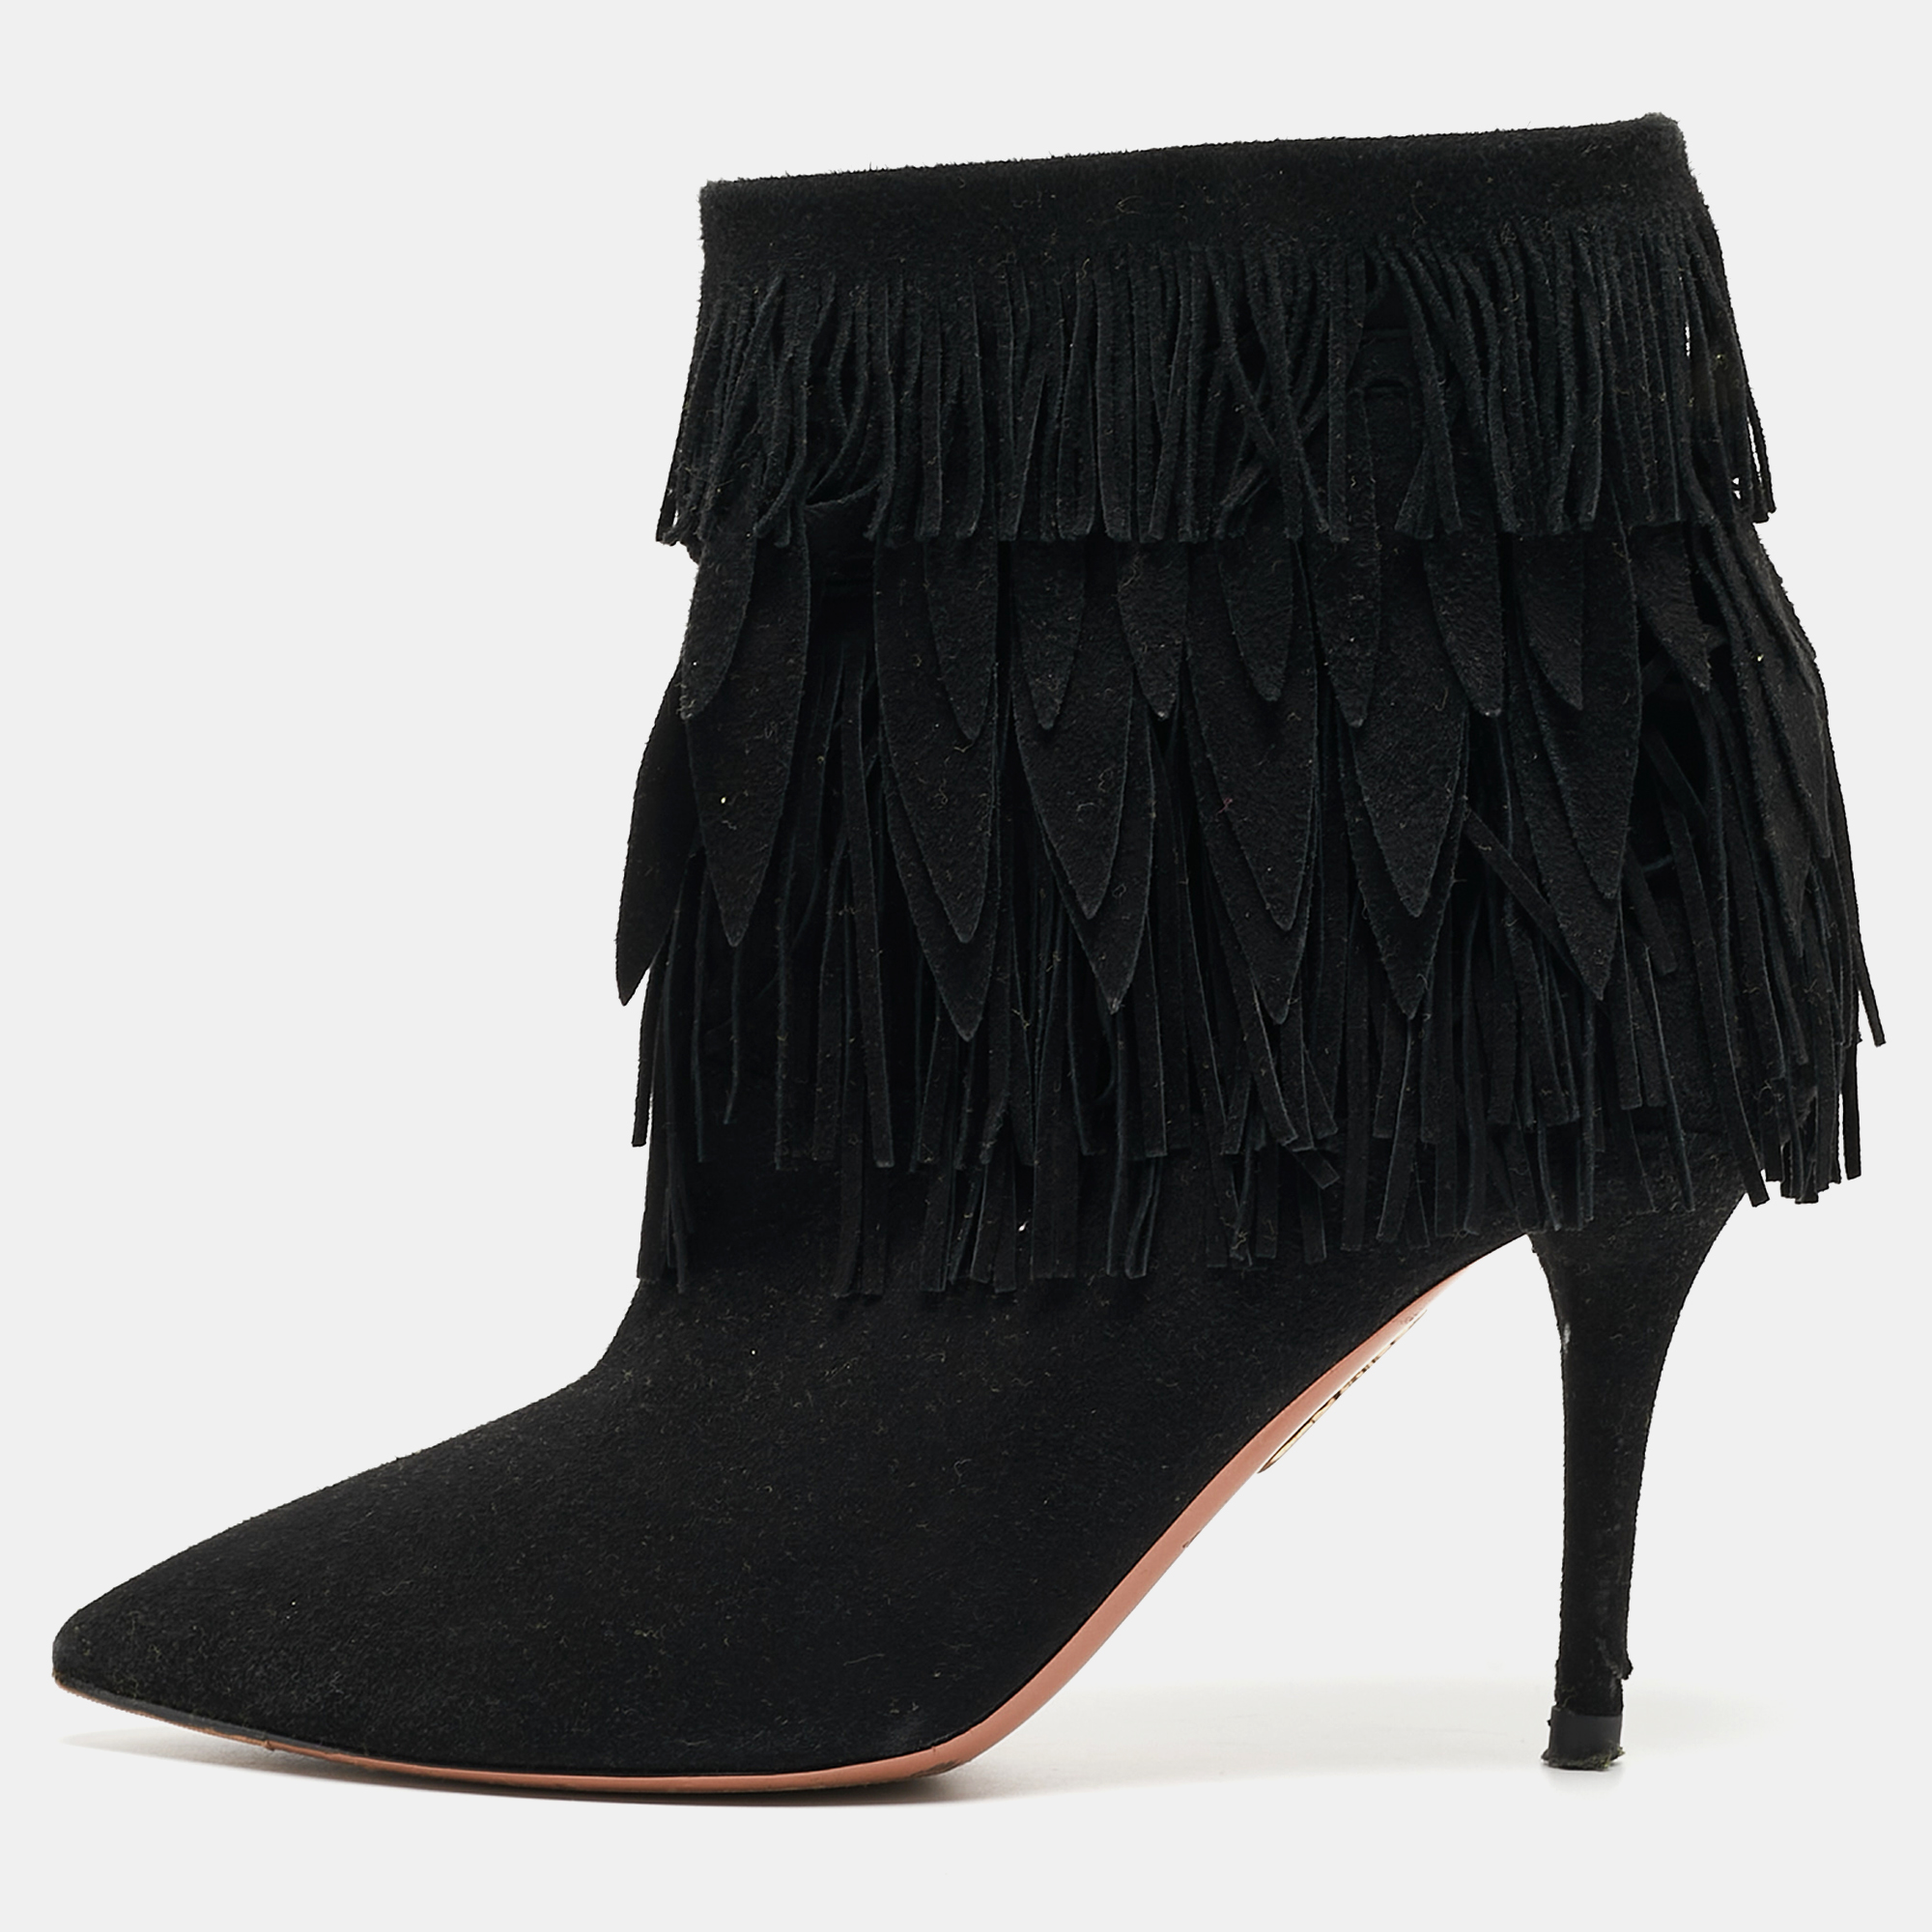 Pre-owned Aquazzura Black Suede Sasha Fringed Ankle Booties Size 36